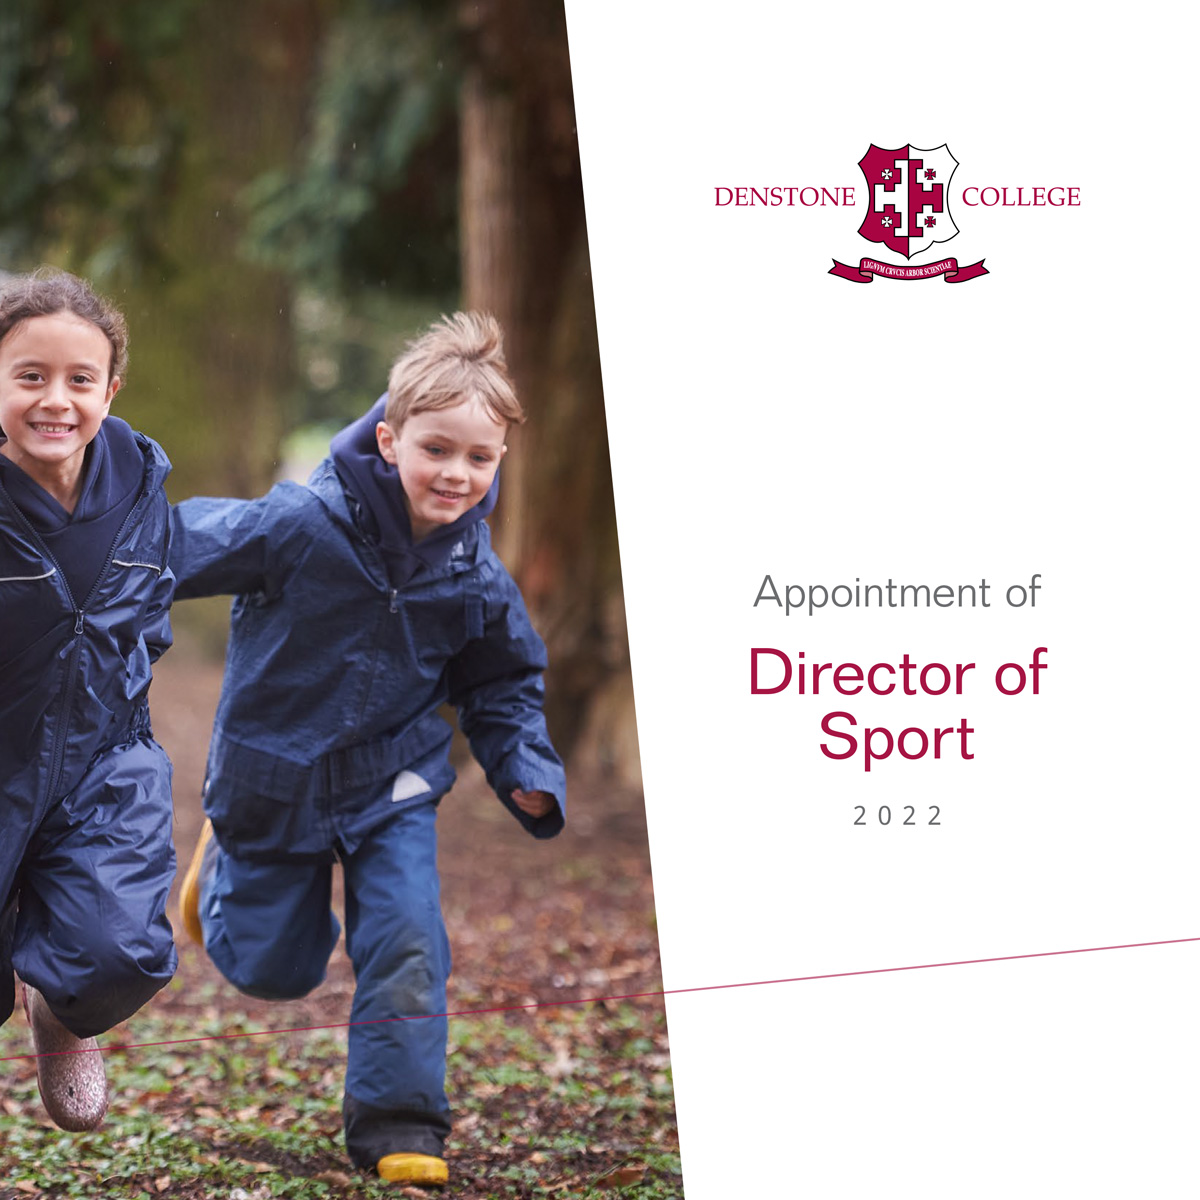 We are delighted to be working alongside Denstone College to appoint a Whole School Director of Sport. The position oversees strategy and provision for sport and exercise throughout the 4-18 age range. Full details at jobsinsport.online/job/80/directo… #jobsinsport #jobs #schoolsport